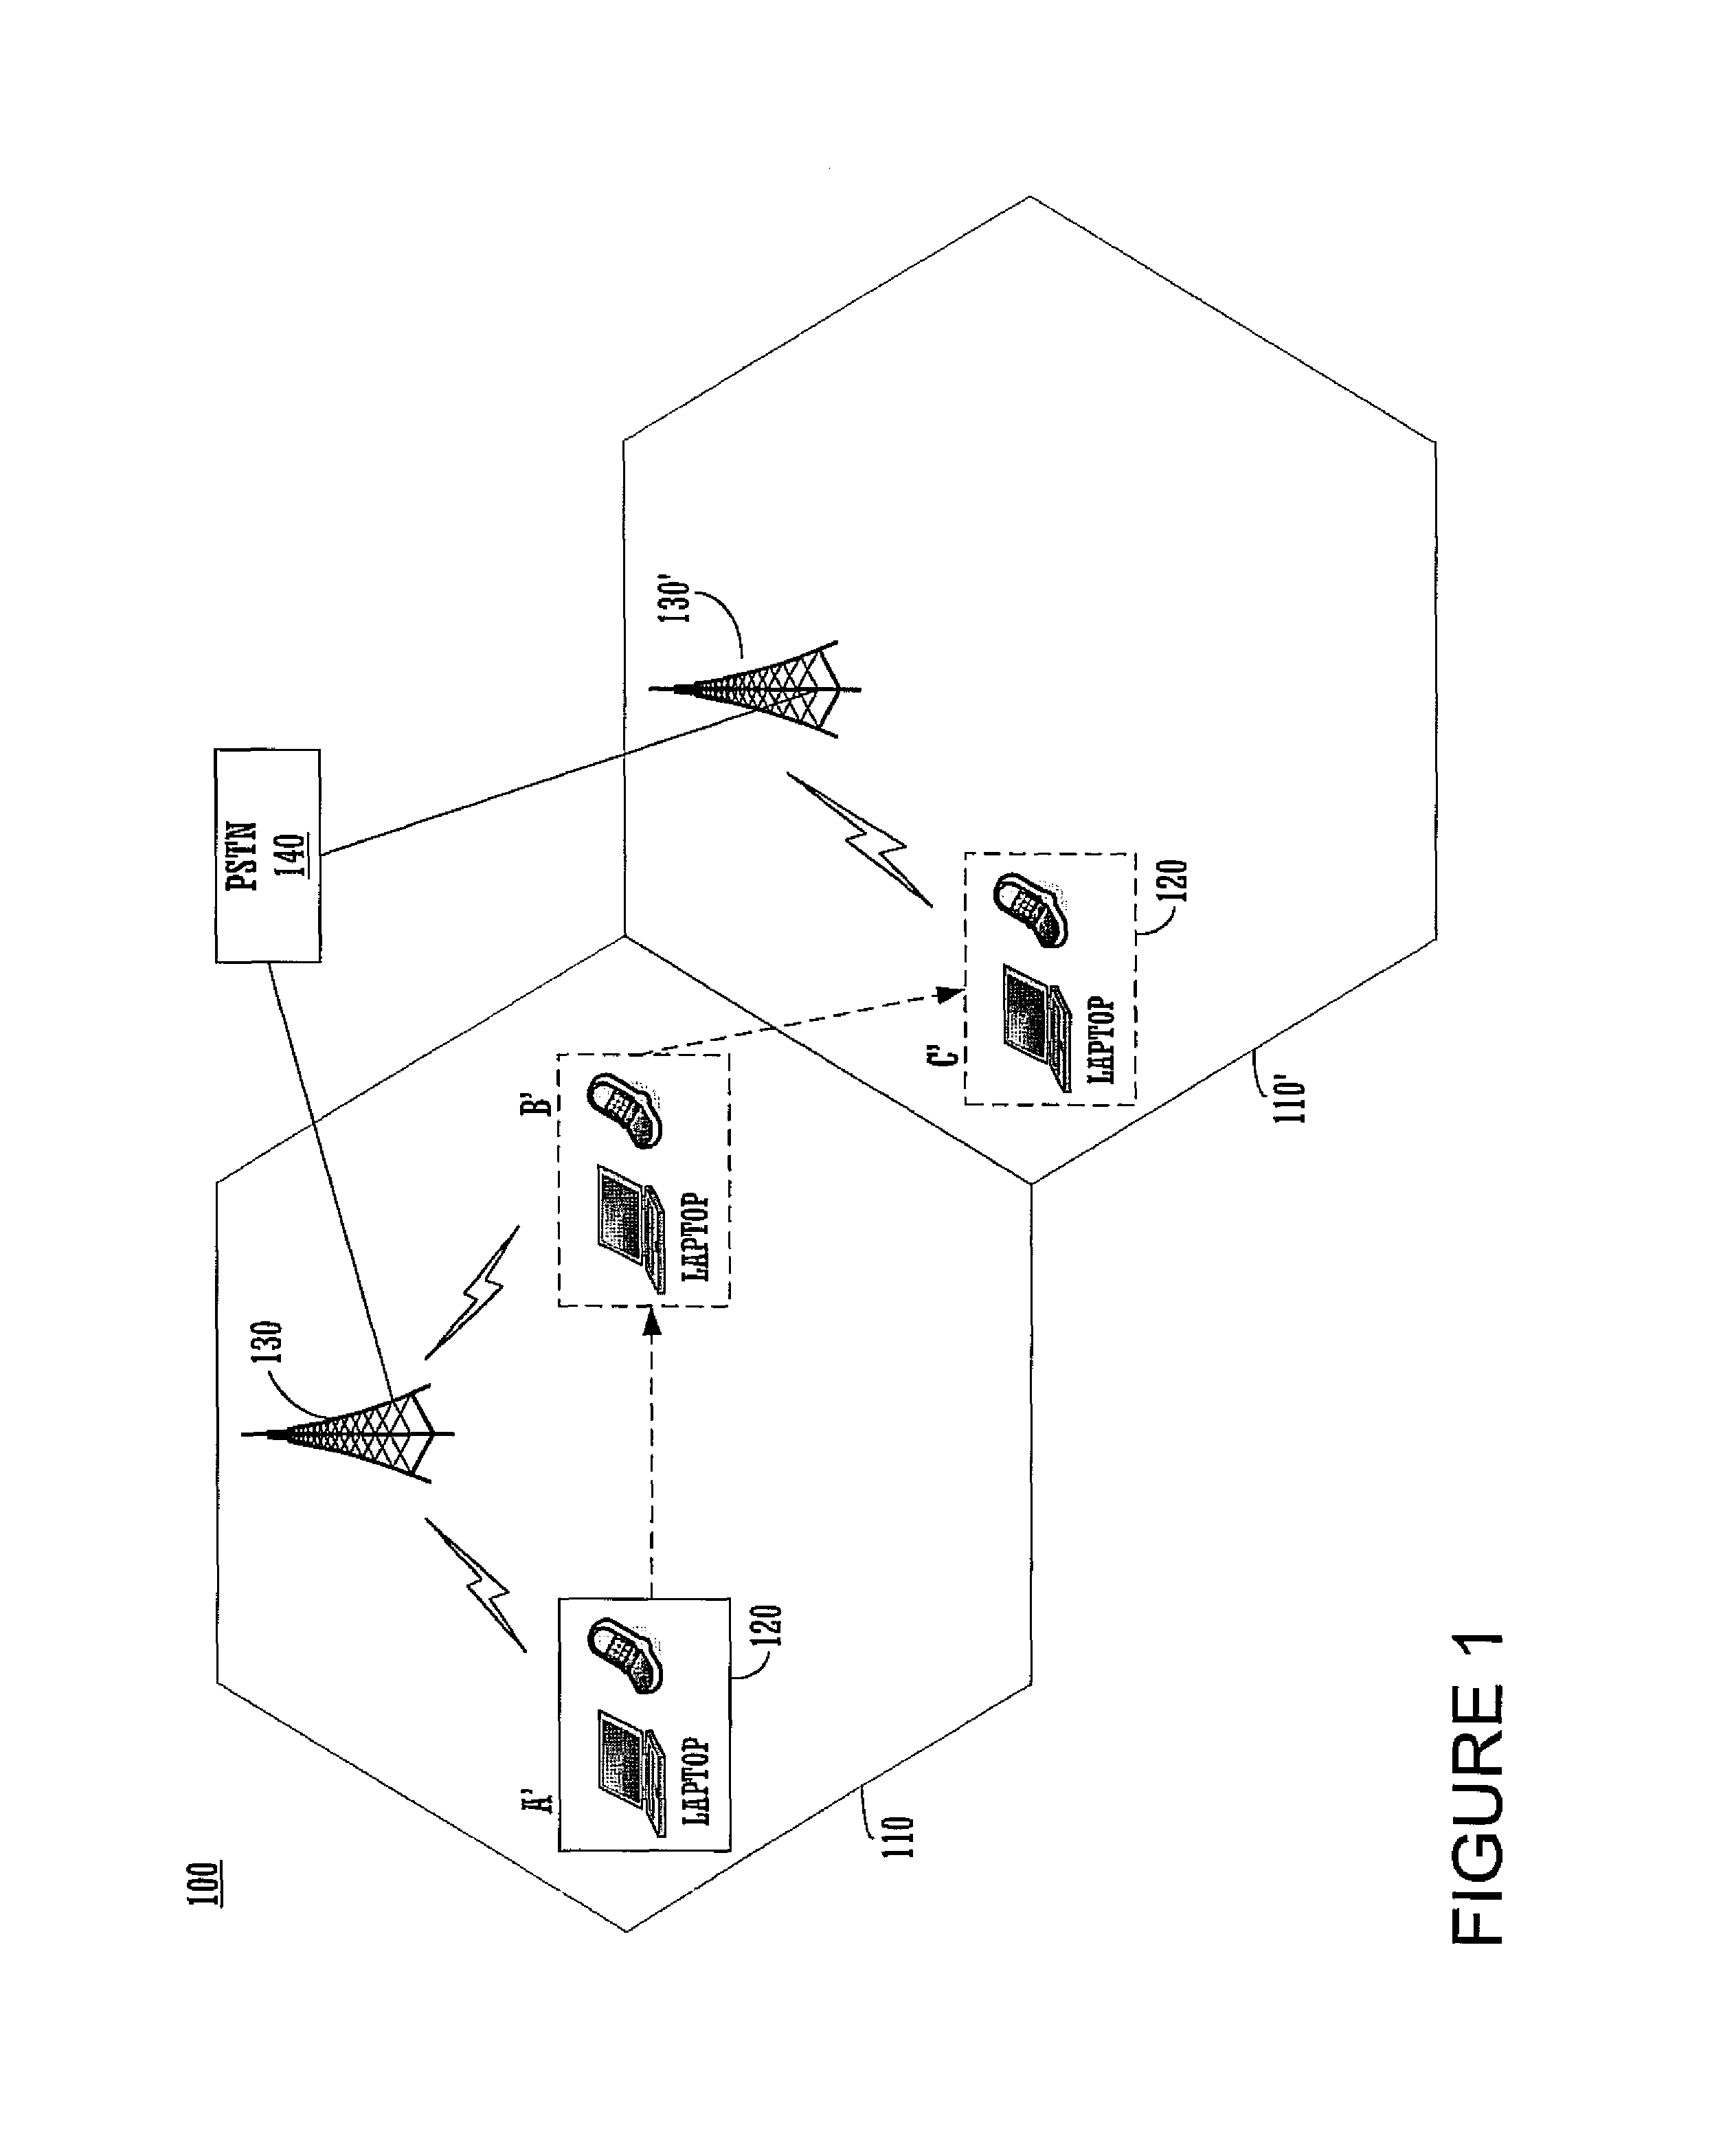 Method and system for collecting data on a wireless device